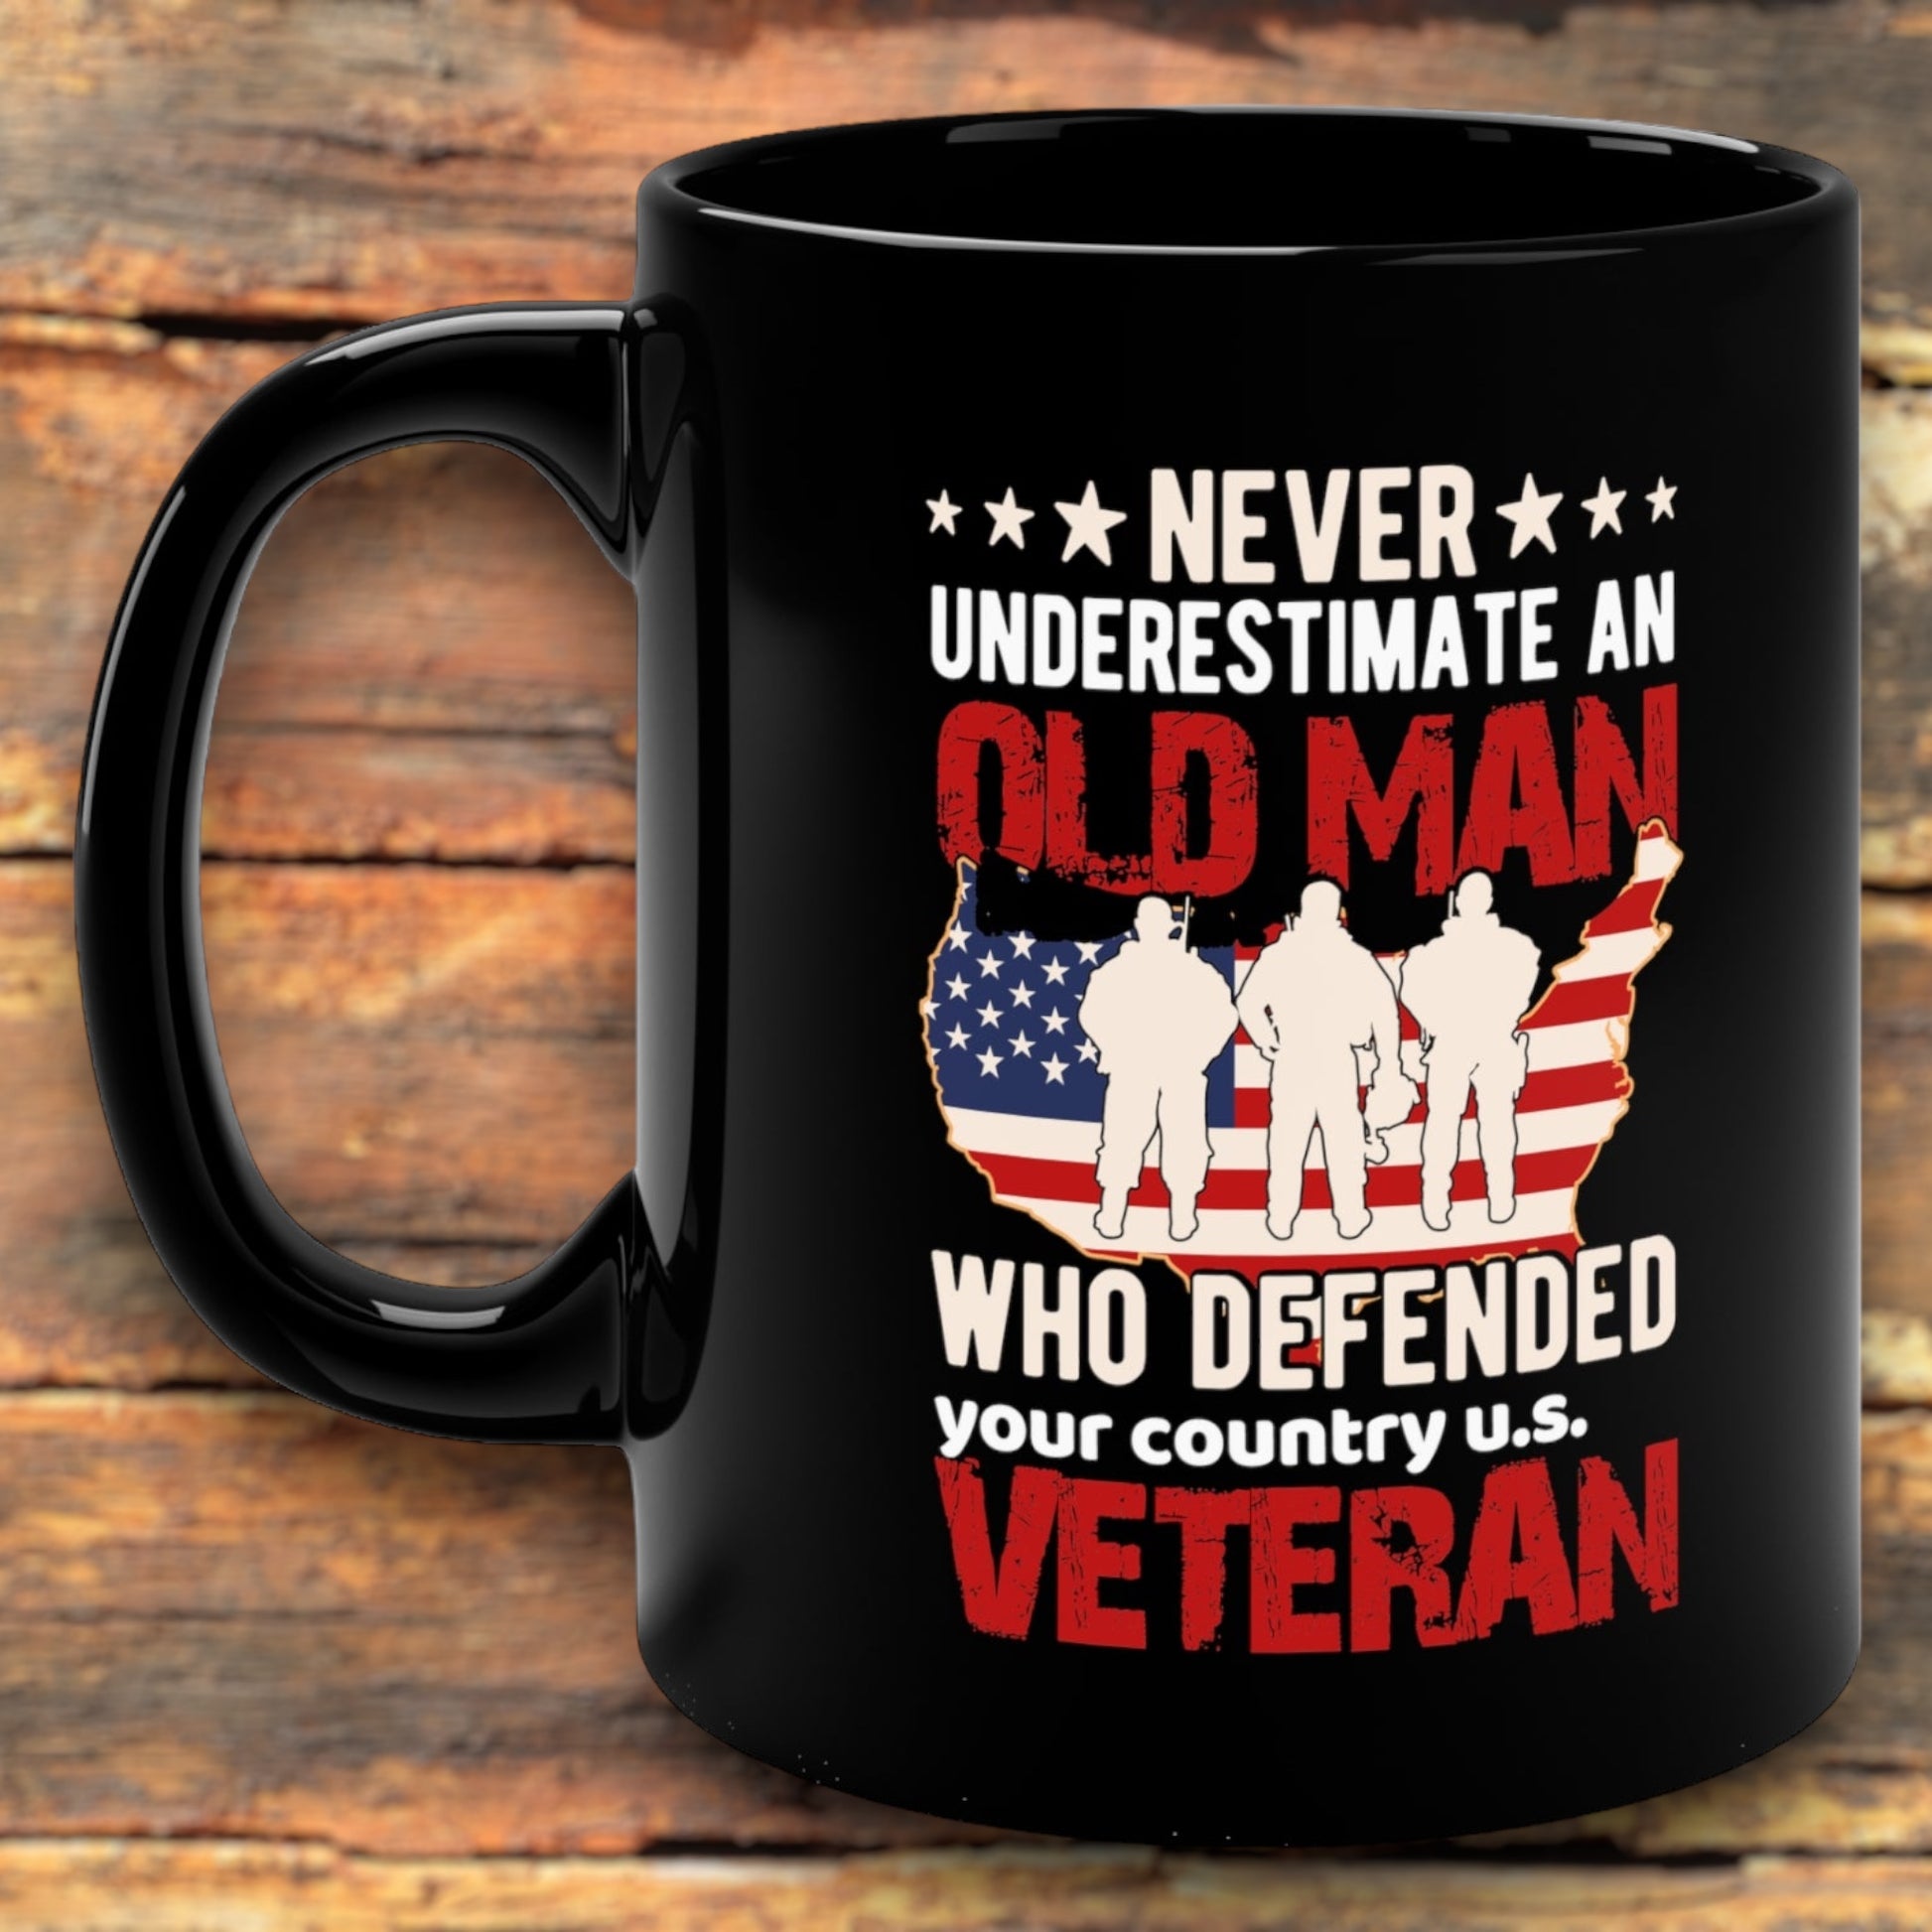 "Old Man Veteran" Coffee Mug - Weave Got Gifts - Unique Gifts You Won’t Find Anywhere Else!